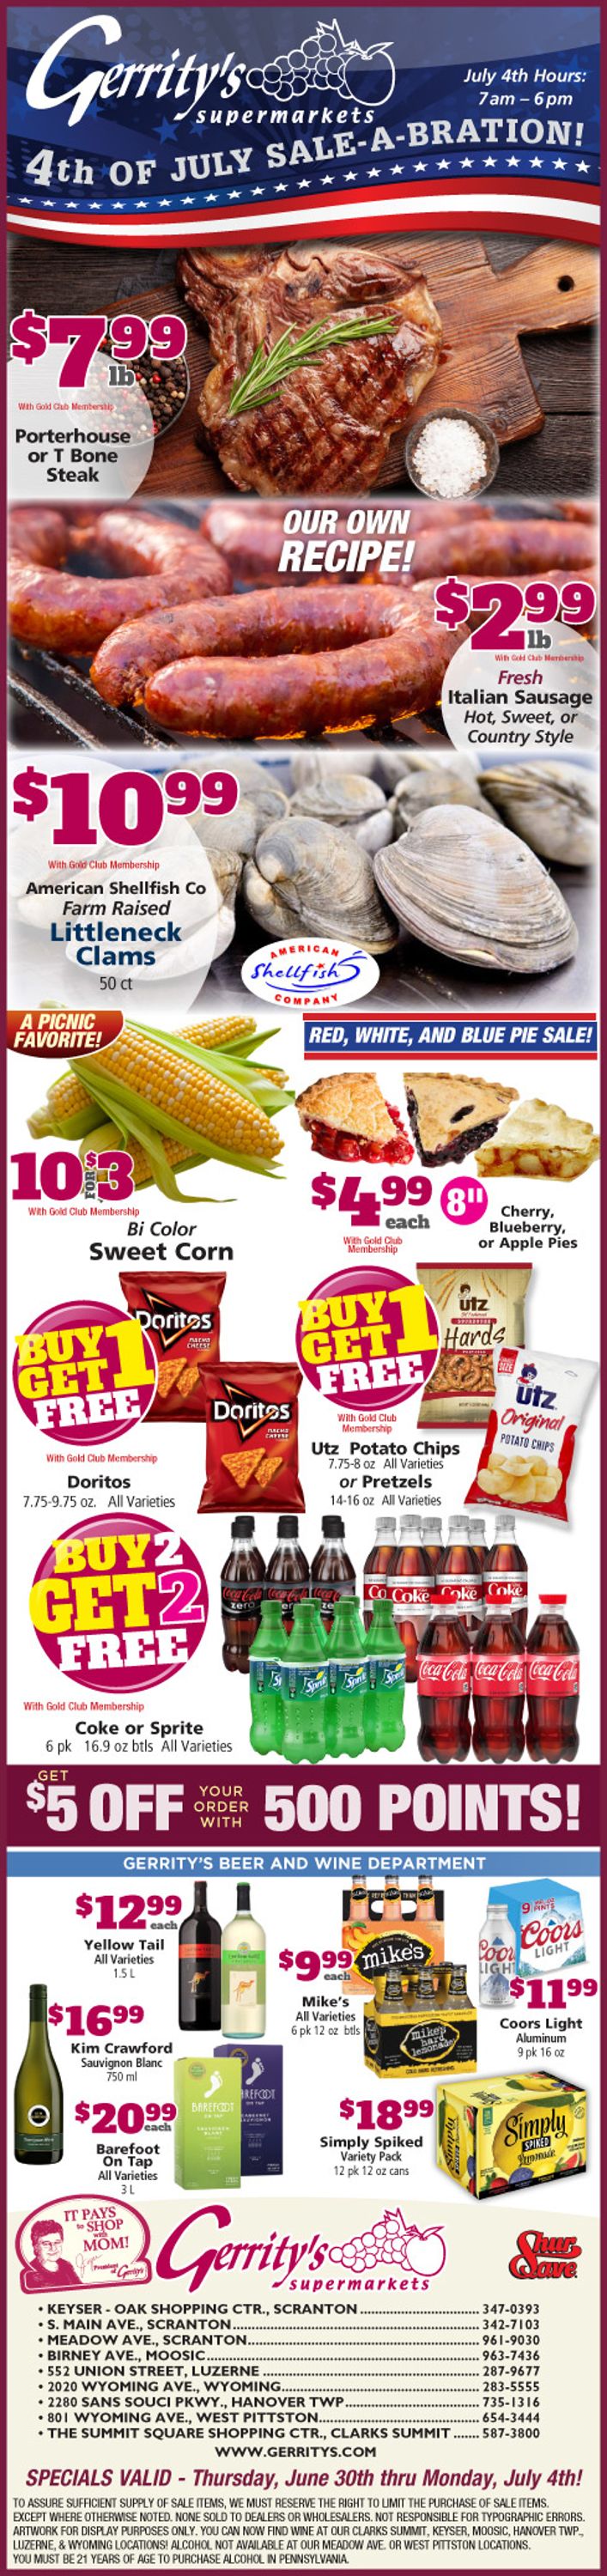 Gerrity's Supermarkets - 4th of July Sale Weekly Ad Circular - valid 06/26-07/02/2022